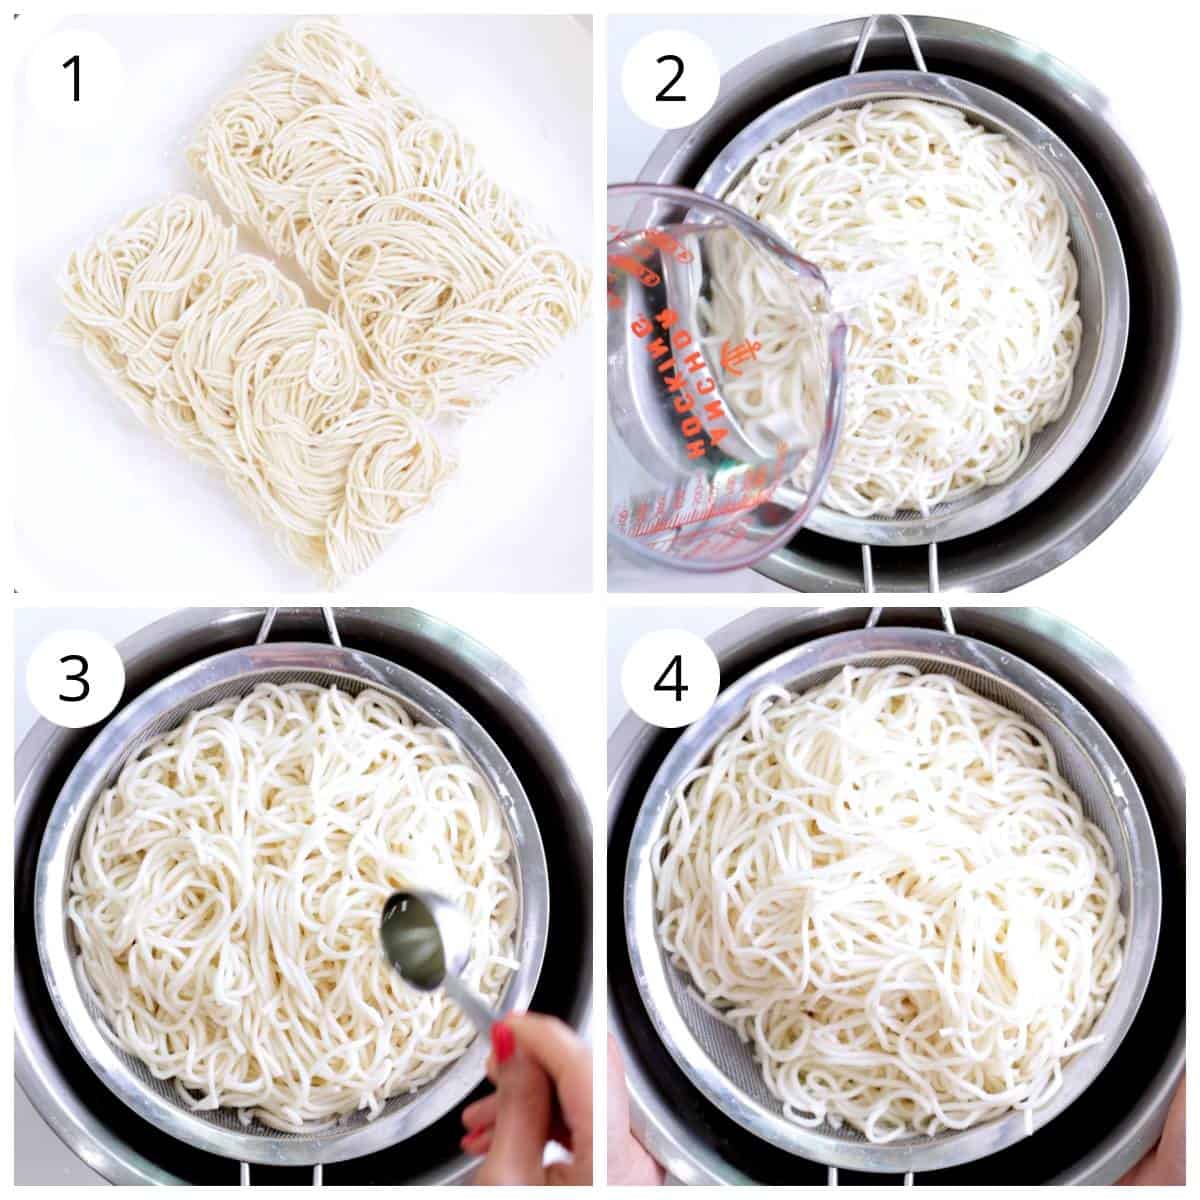 Steps for cooking the noodles by boiling